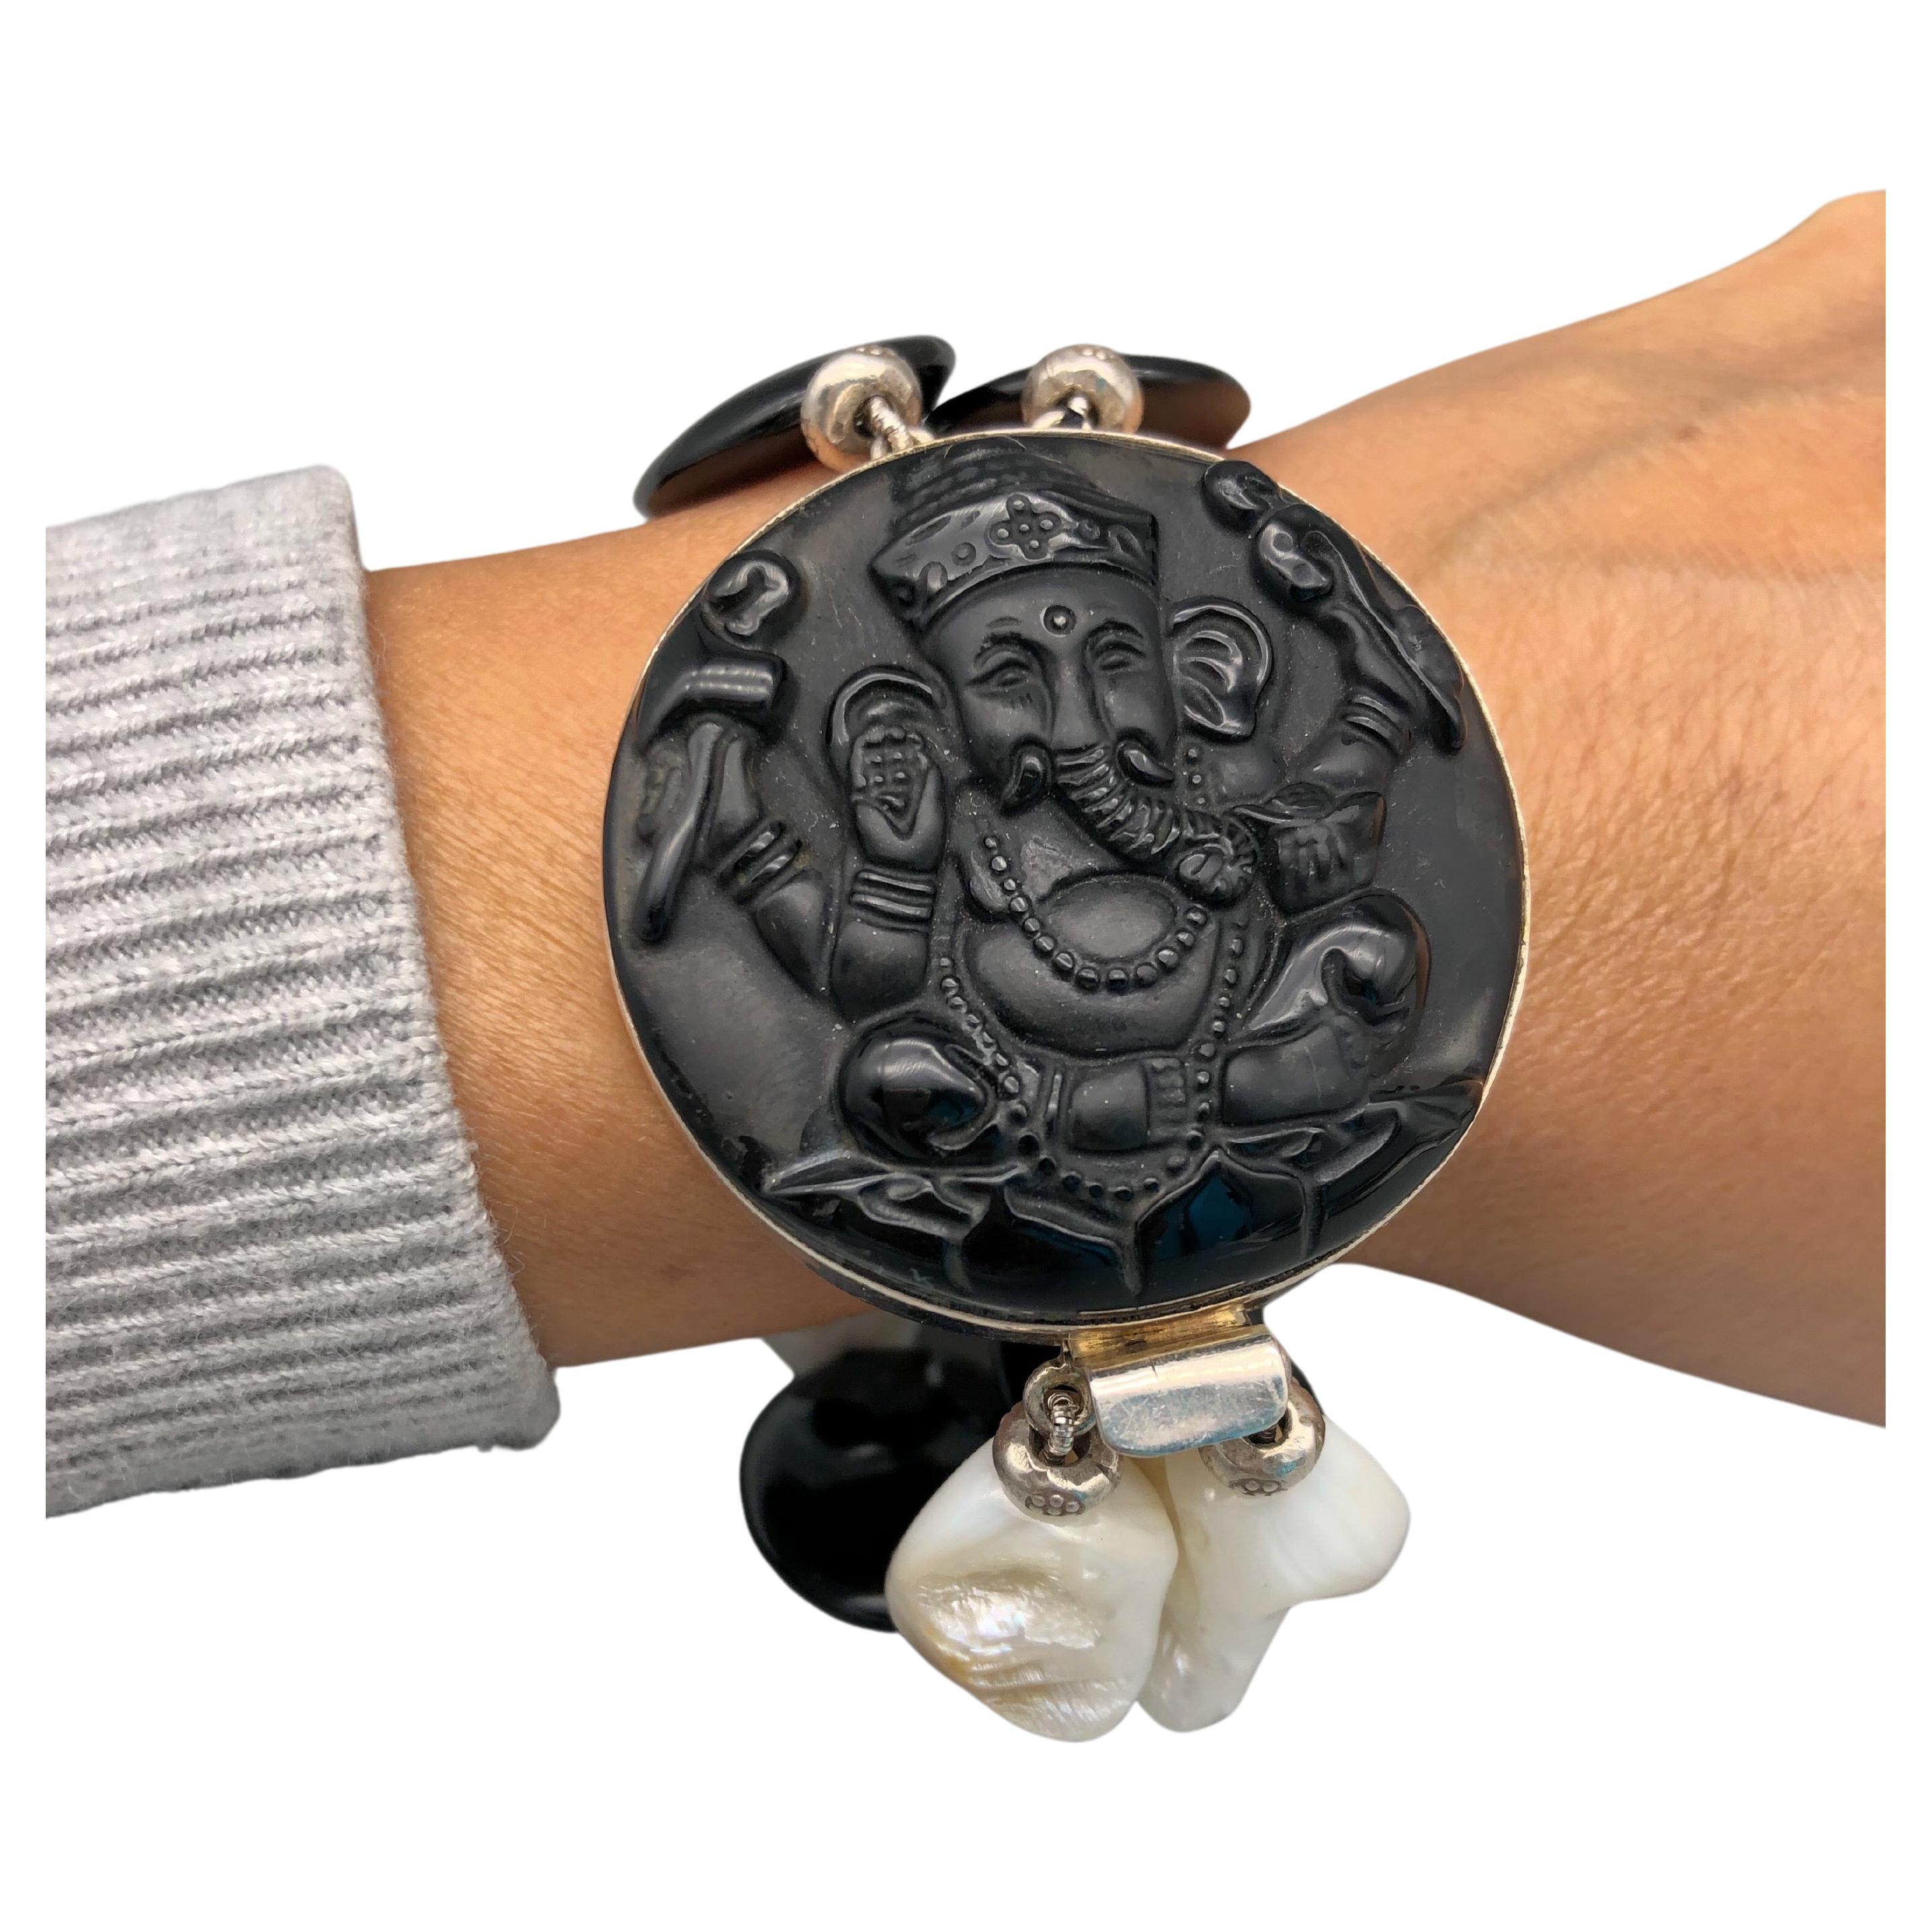 A.Jeschel Statement bold Onyx bracelet with lord Ganesh carved clasp.